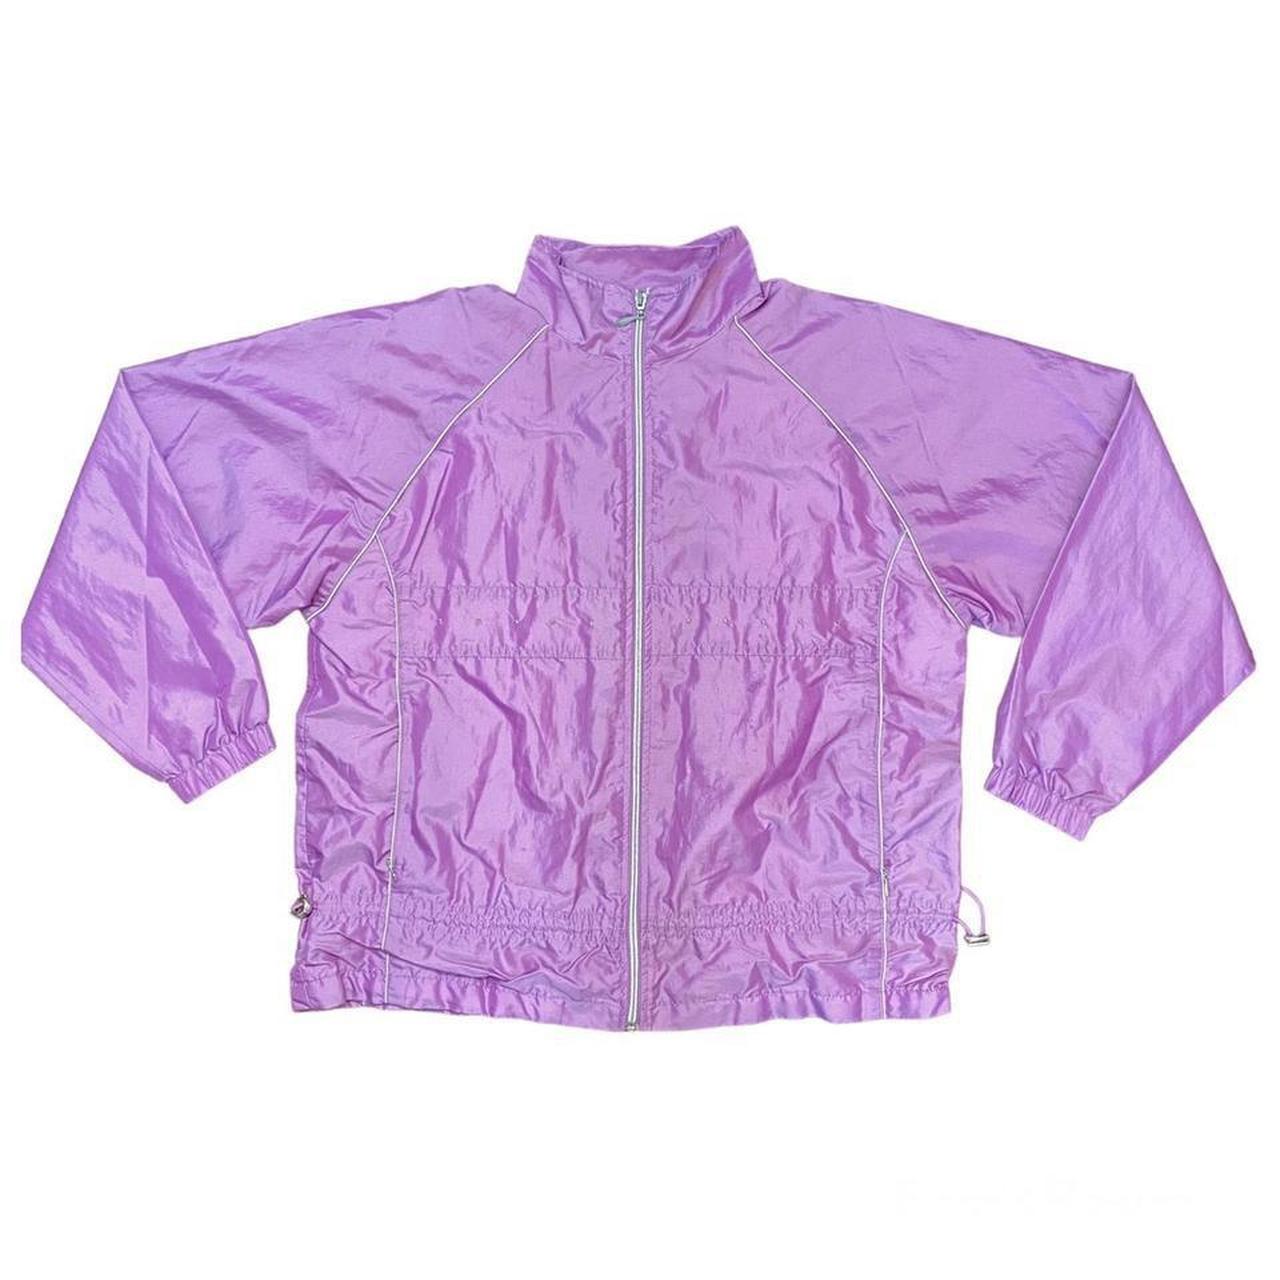 East West Women's Purple and Silver Jacket